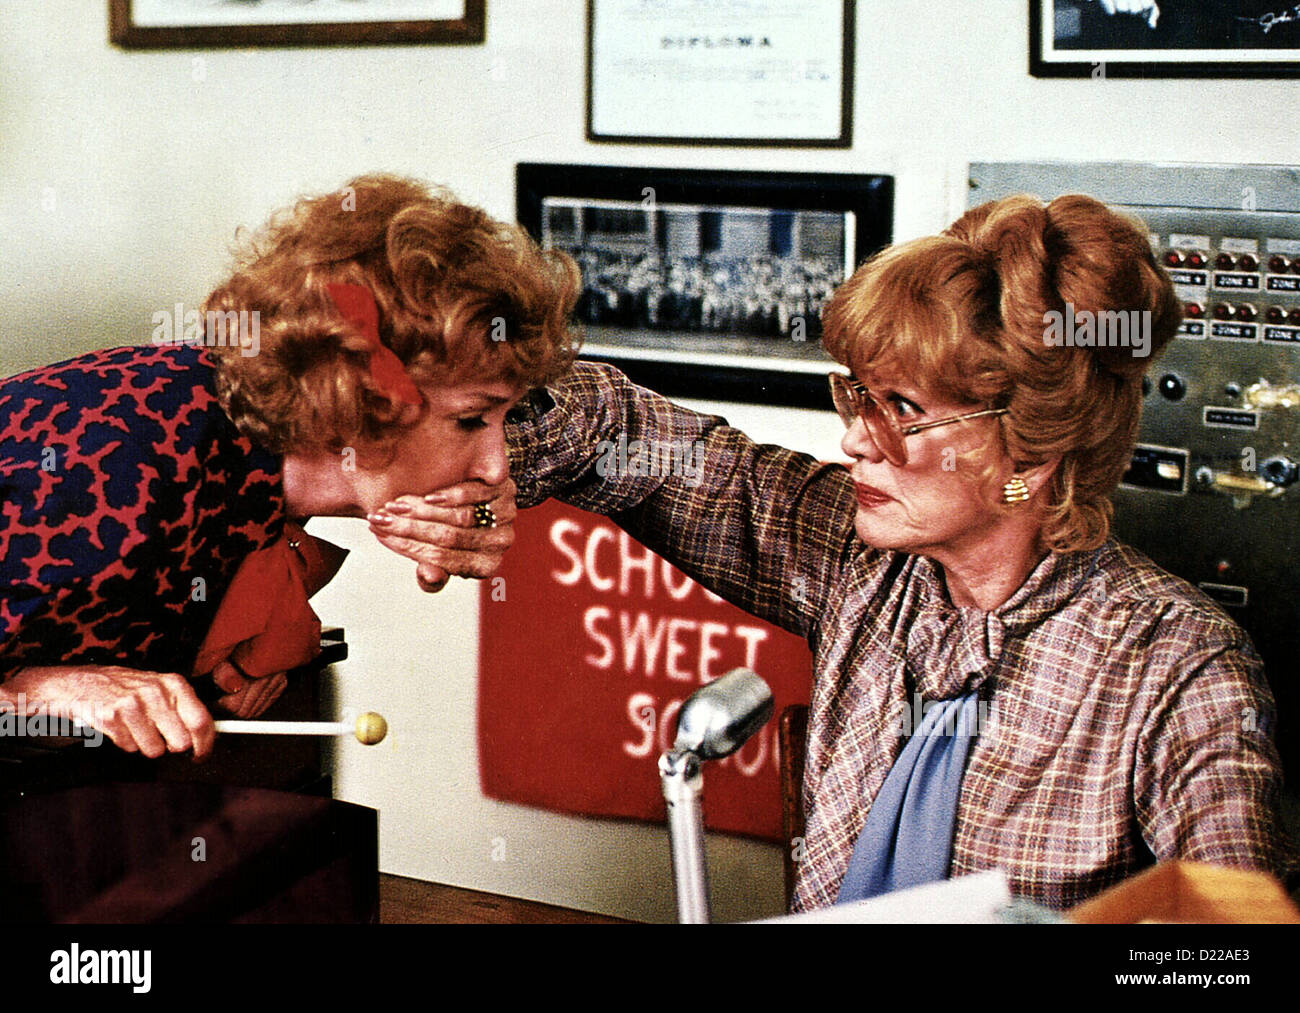 Grease 2   Grease 2   Doddy Goodman, Eve Arden Blanche (Doddy Goodman), Mrs. McGee (Eve Arden) *** Local Caption *** 1982  -- Stock Photo